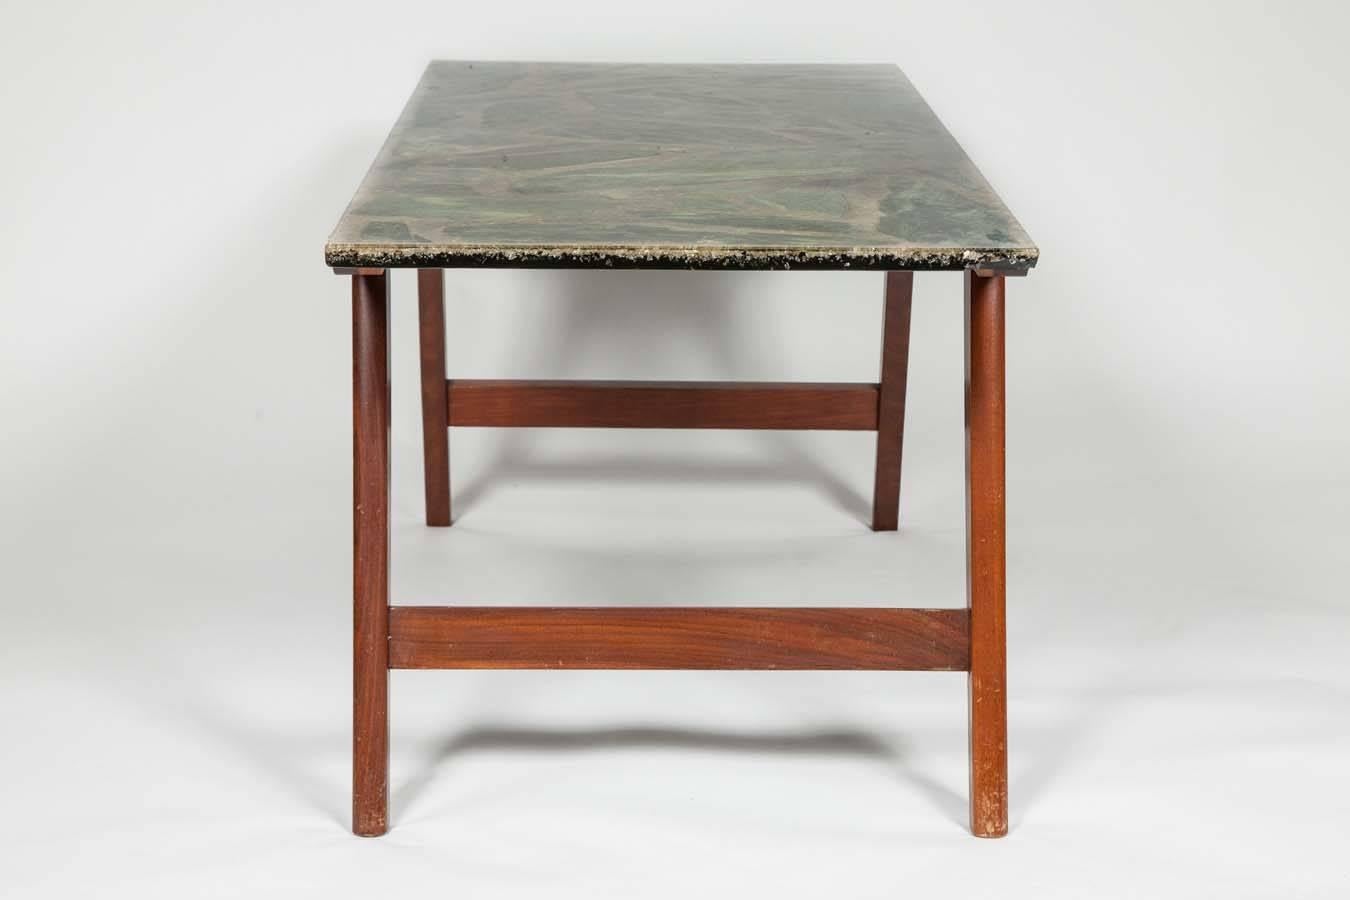 20th Century Green Marble and Resin Danish Style Coffee Table with Angled Base